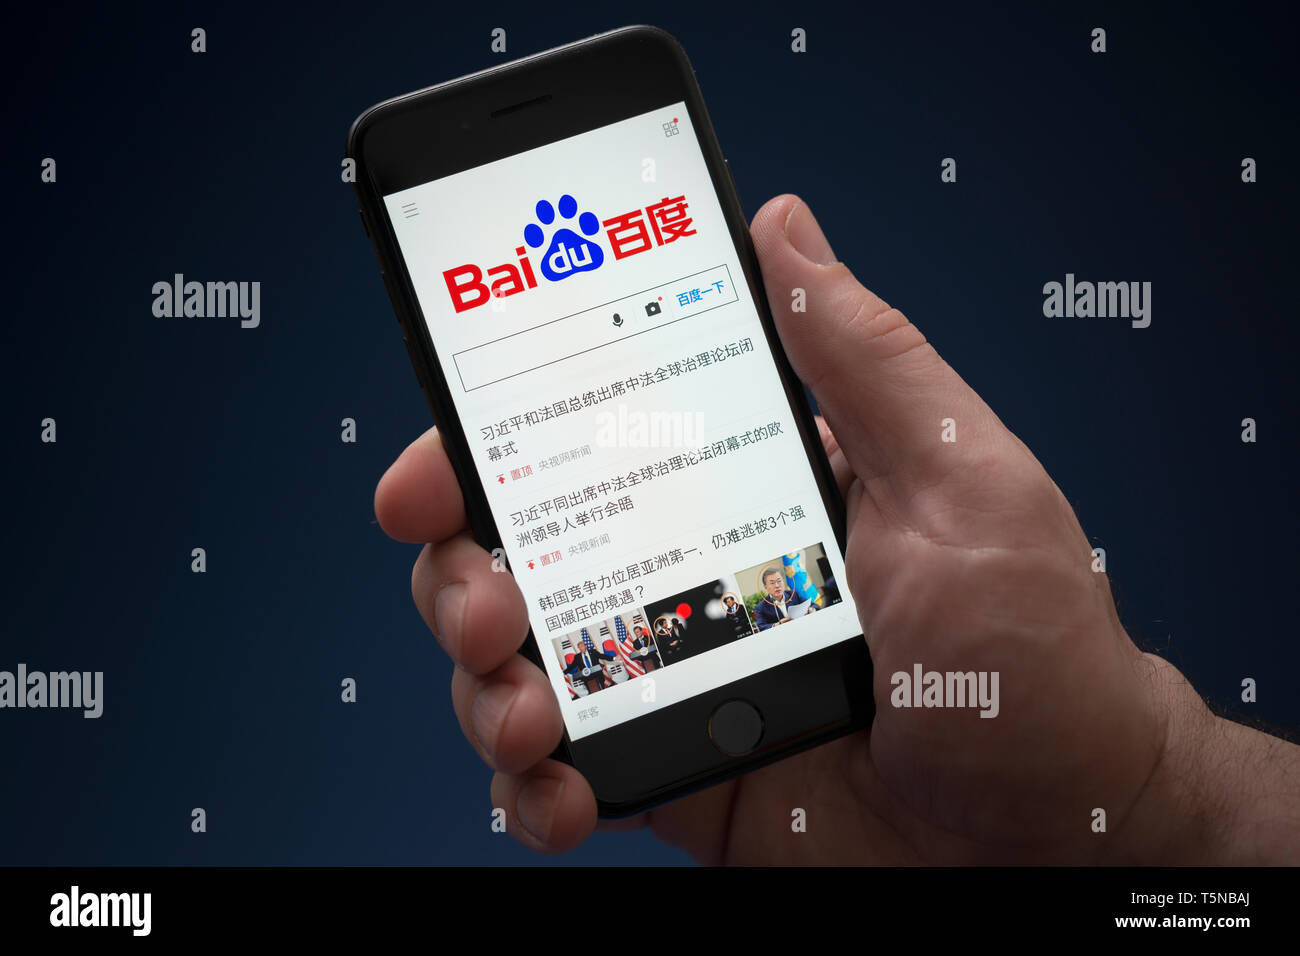 A man looks at his iPhone which displays the Baidu logo (Editorial use only). Stock Photo